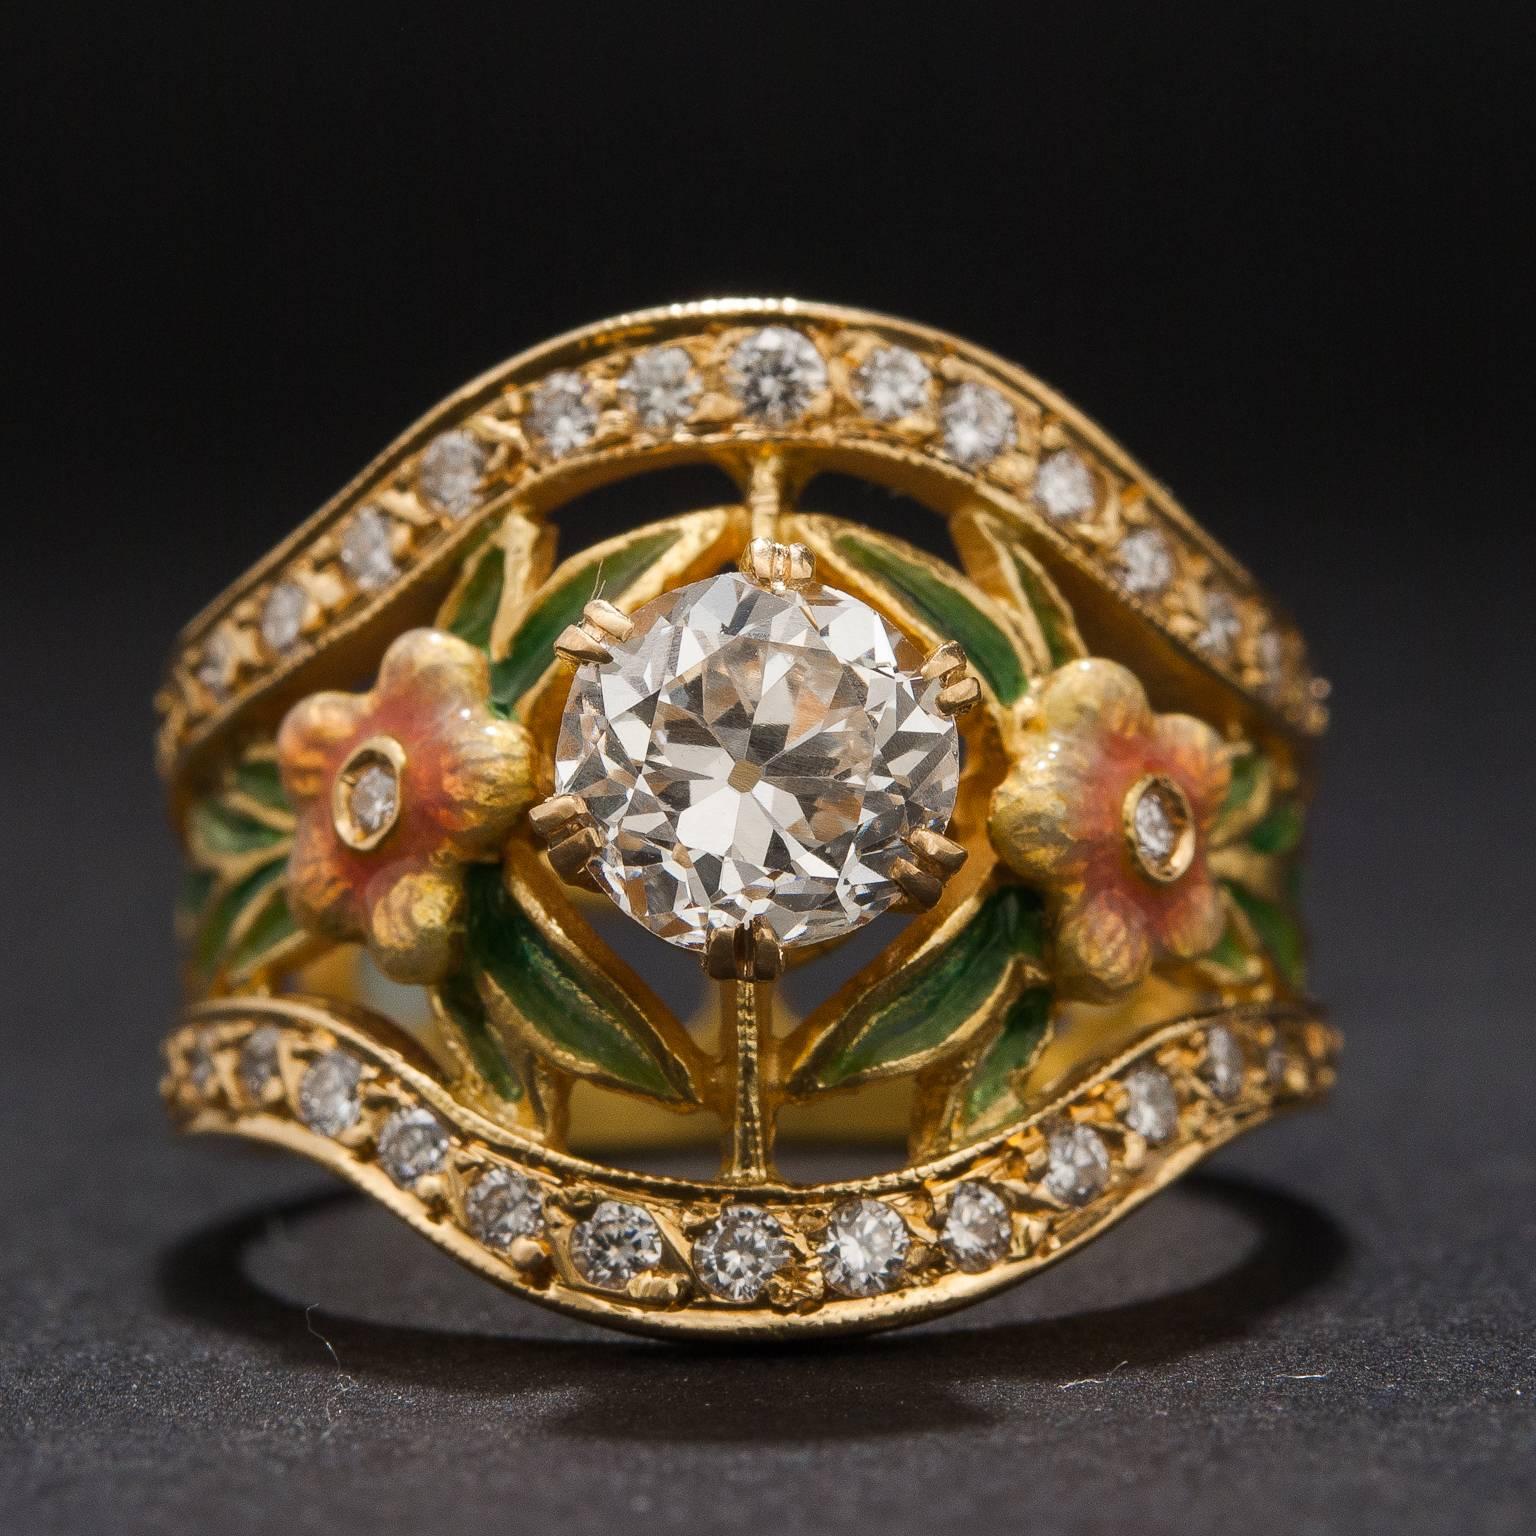 This lovely diamond ring features exquisite enamel work by Masriera. The center diamond is .92 carats and GIA certified I color, VS2 clarity. The piece includes an additional .60 total carats of diamonds and is made in 18k yellow gold. This ring is